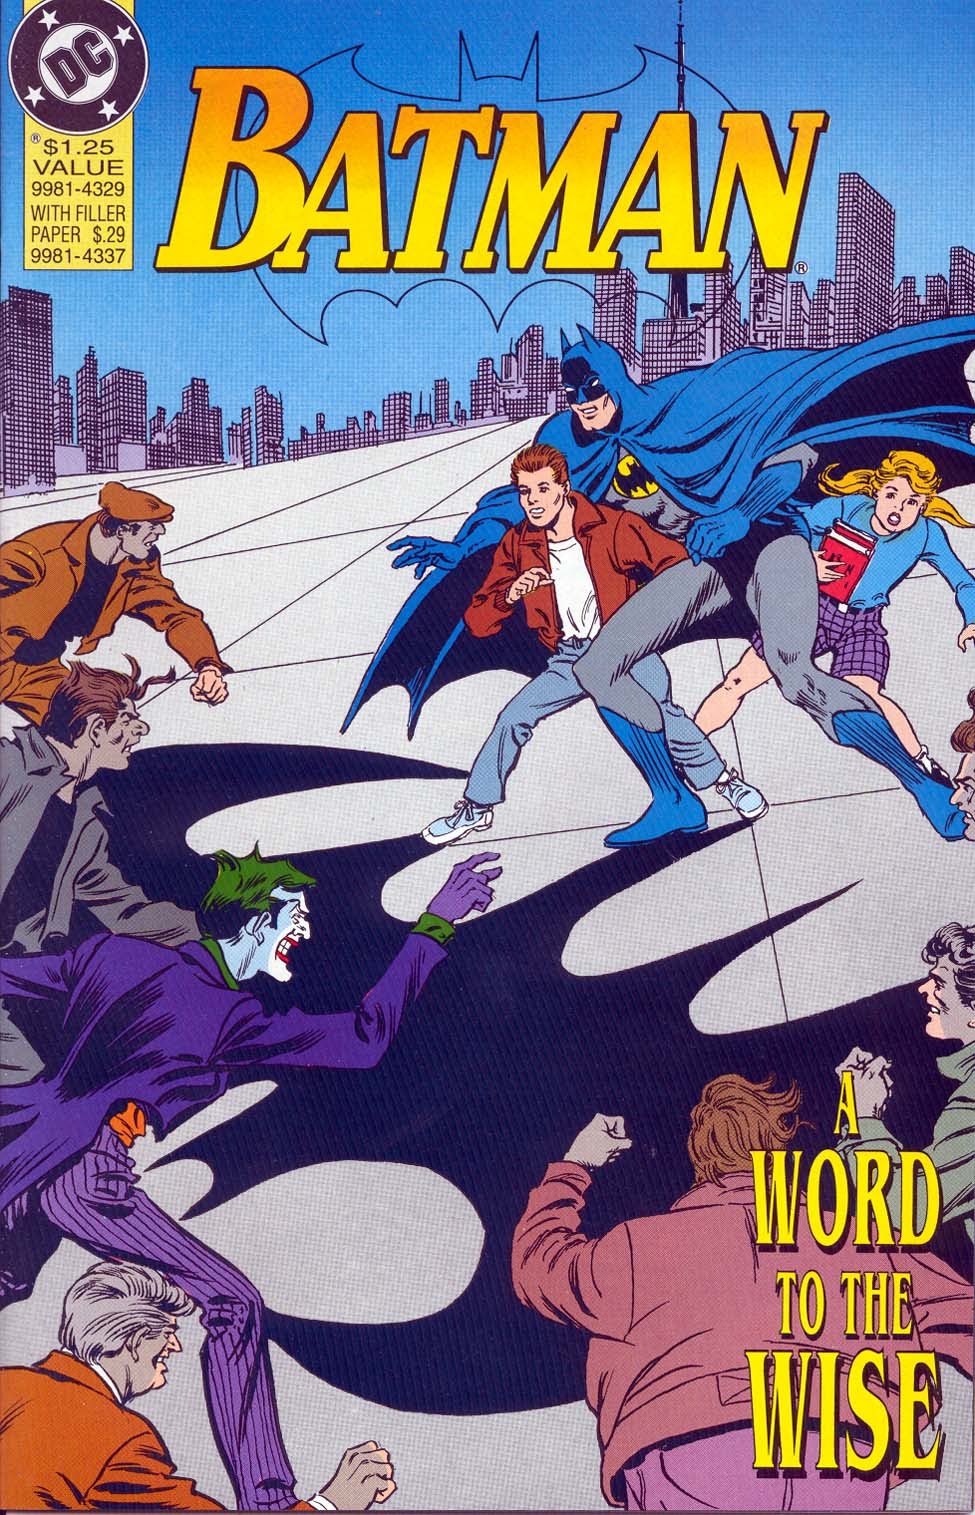 Read online Batman: A Word to the Wise comic -  Issue # Full - 1